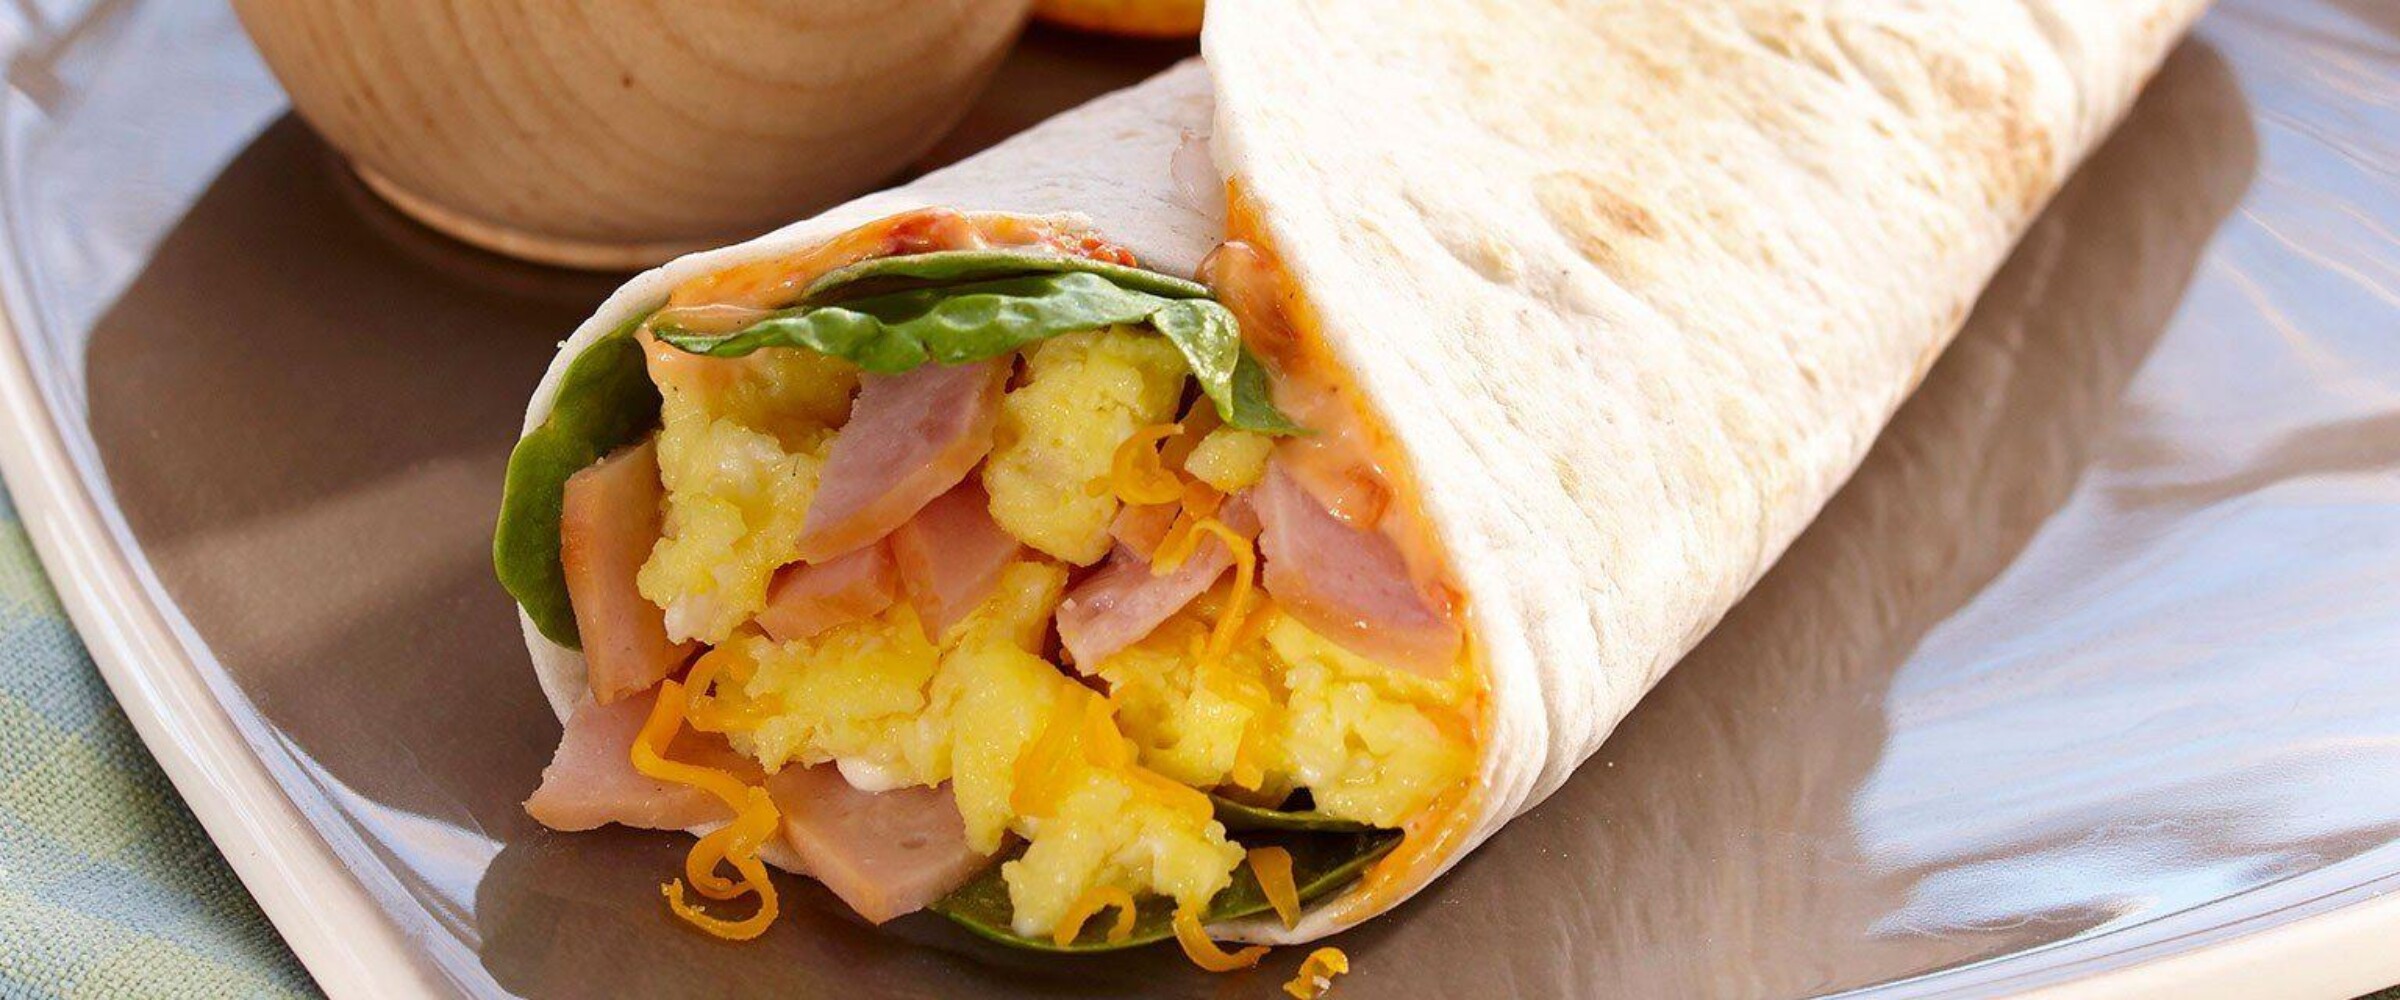 Eggs and ham in a wrap